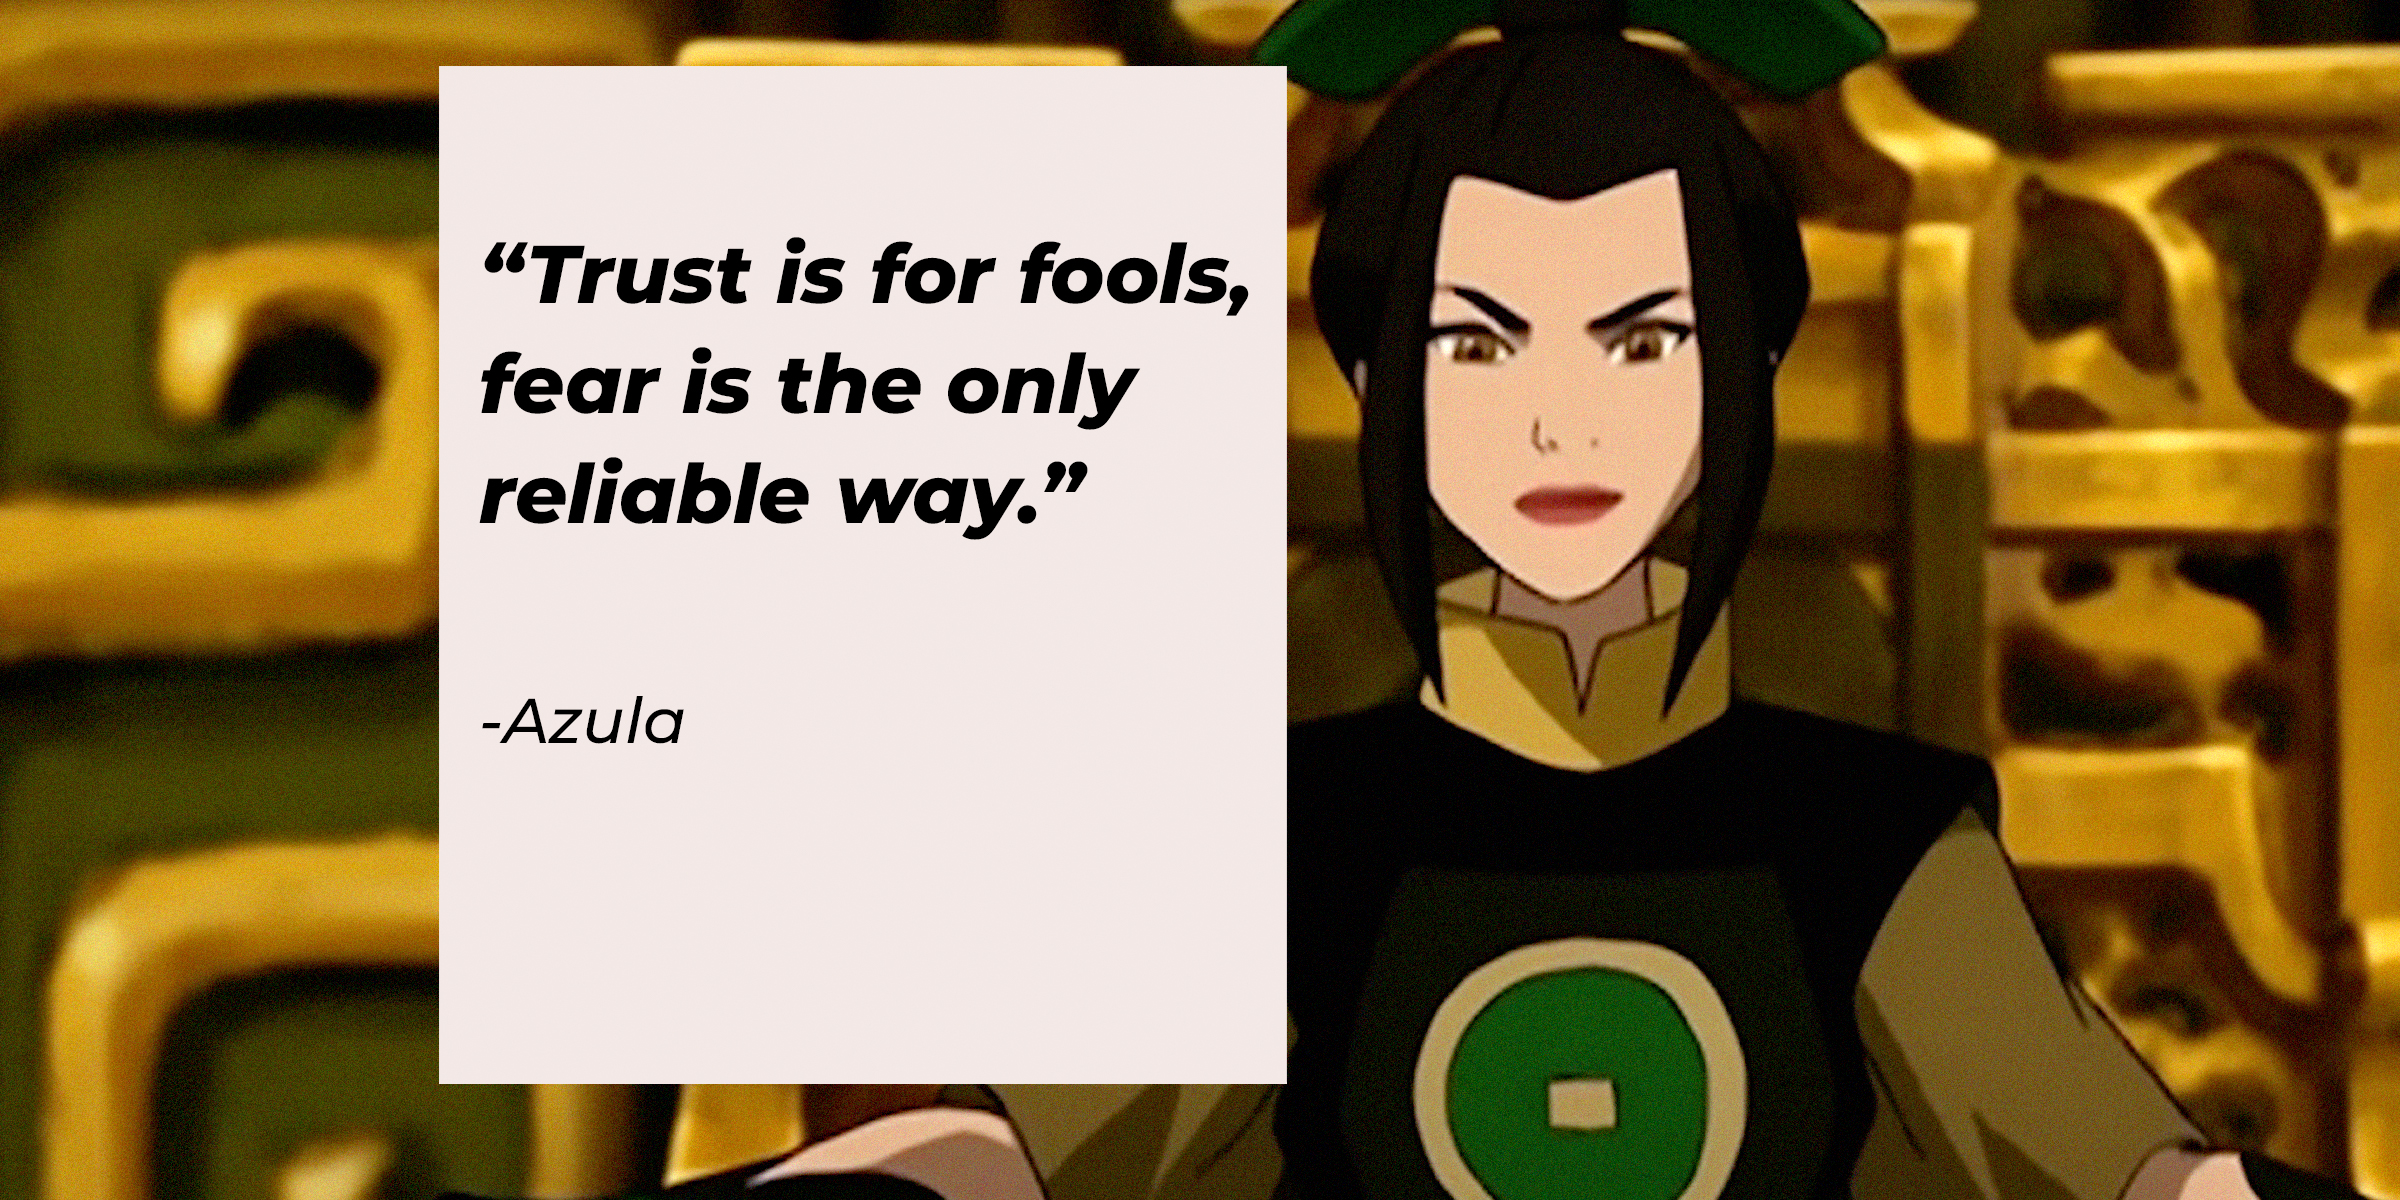 A photo of Azula with Azula's quote: “Trust is for fools, fear is the only reliable way.” | Source: youtube.com/TeamAvatar